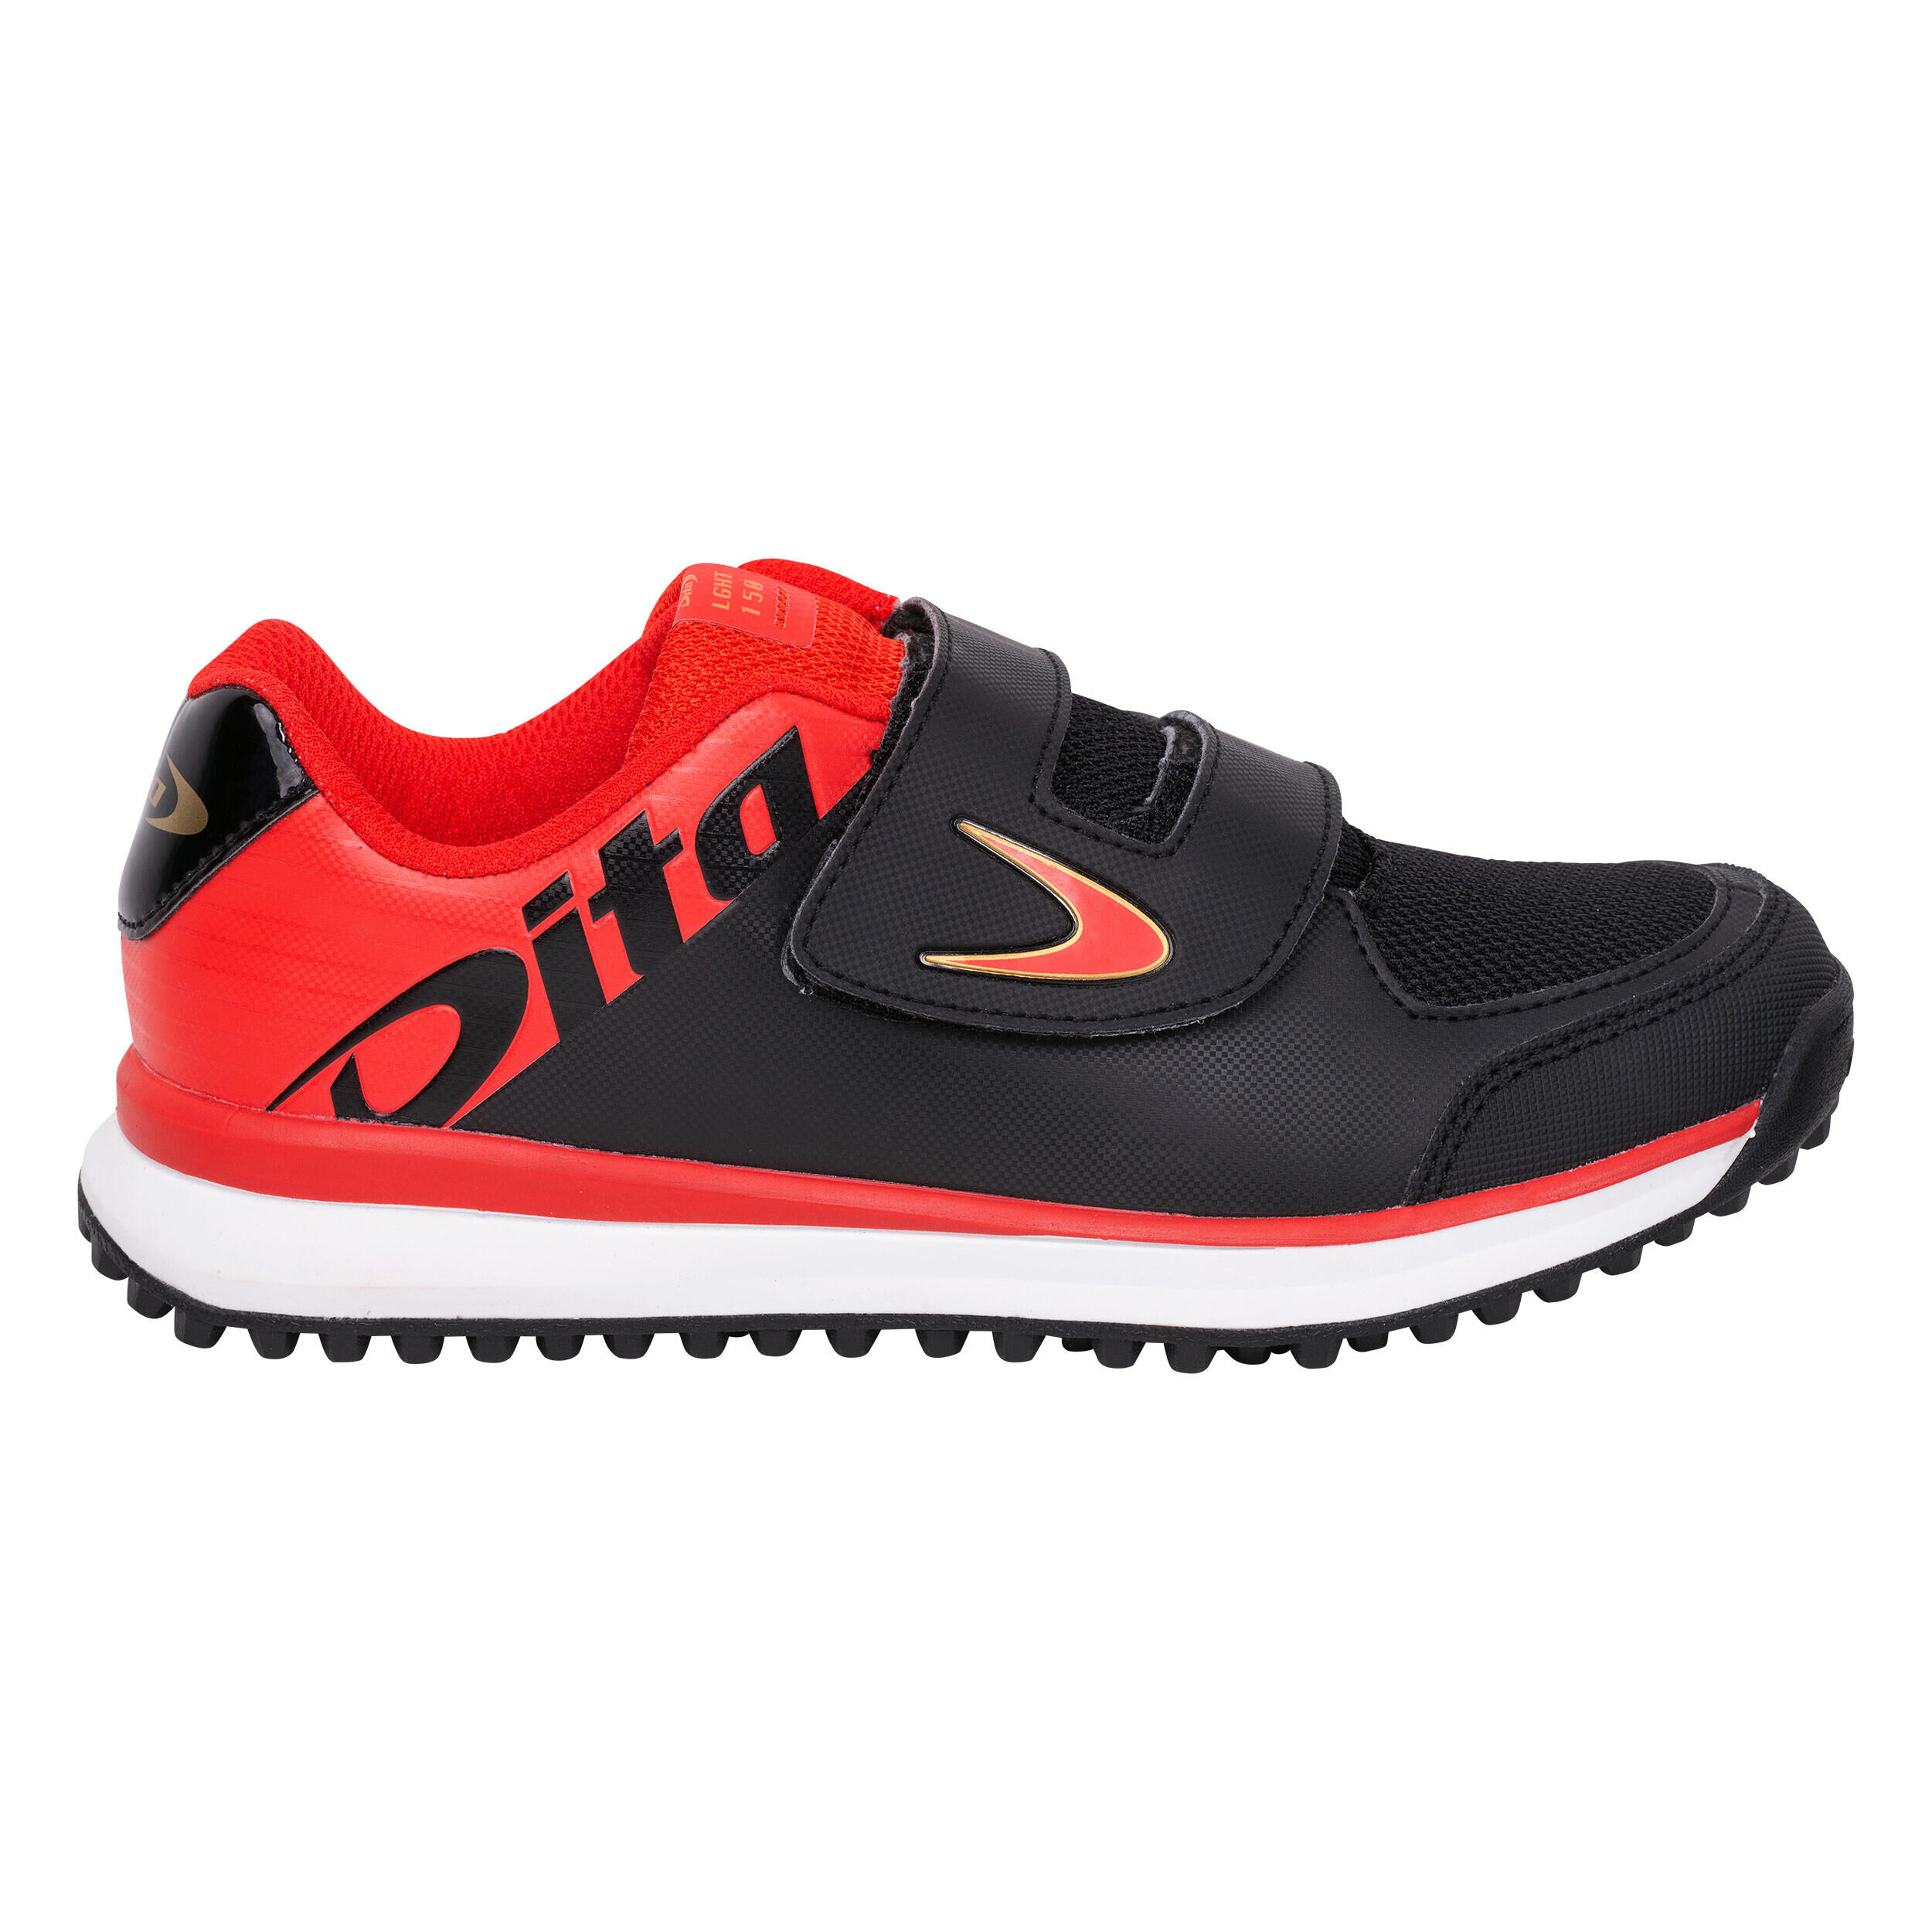 DITA Kids' Low-Intensity Field Hockey Shoes Fix And Go - Red/Black